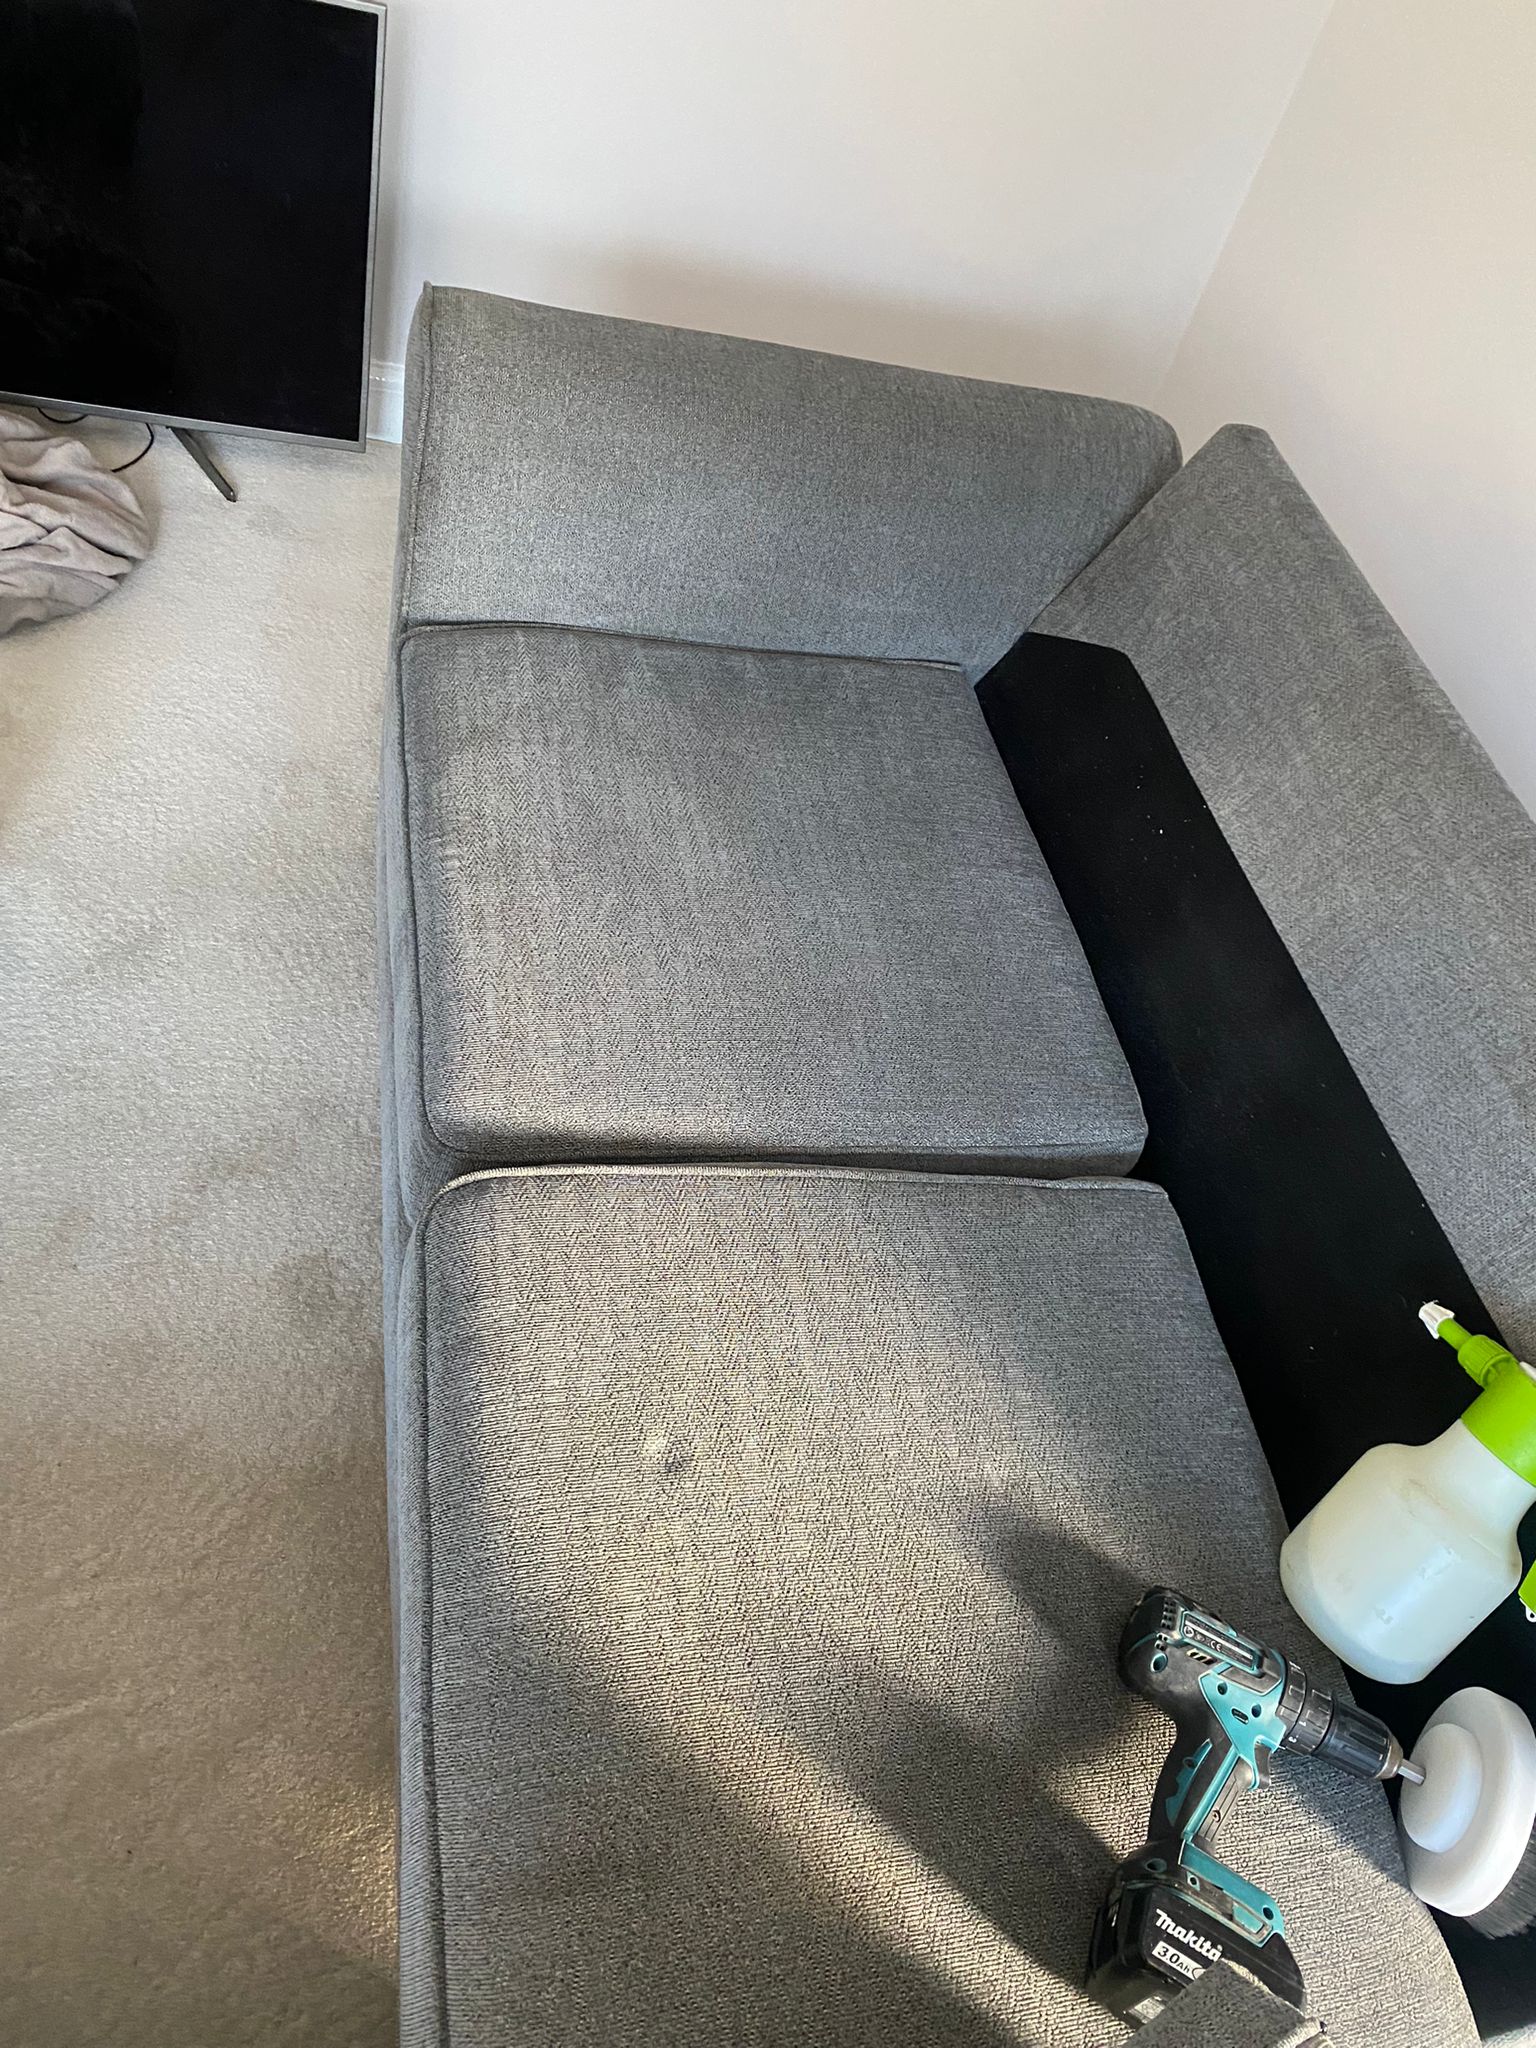 Stain removal on a sofa